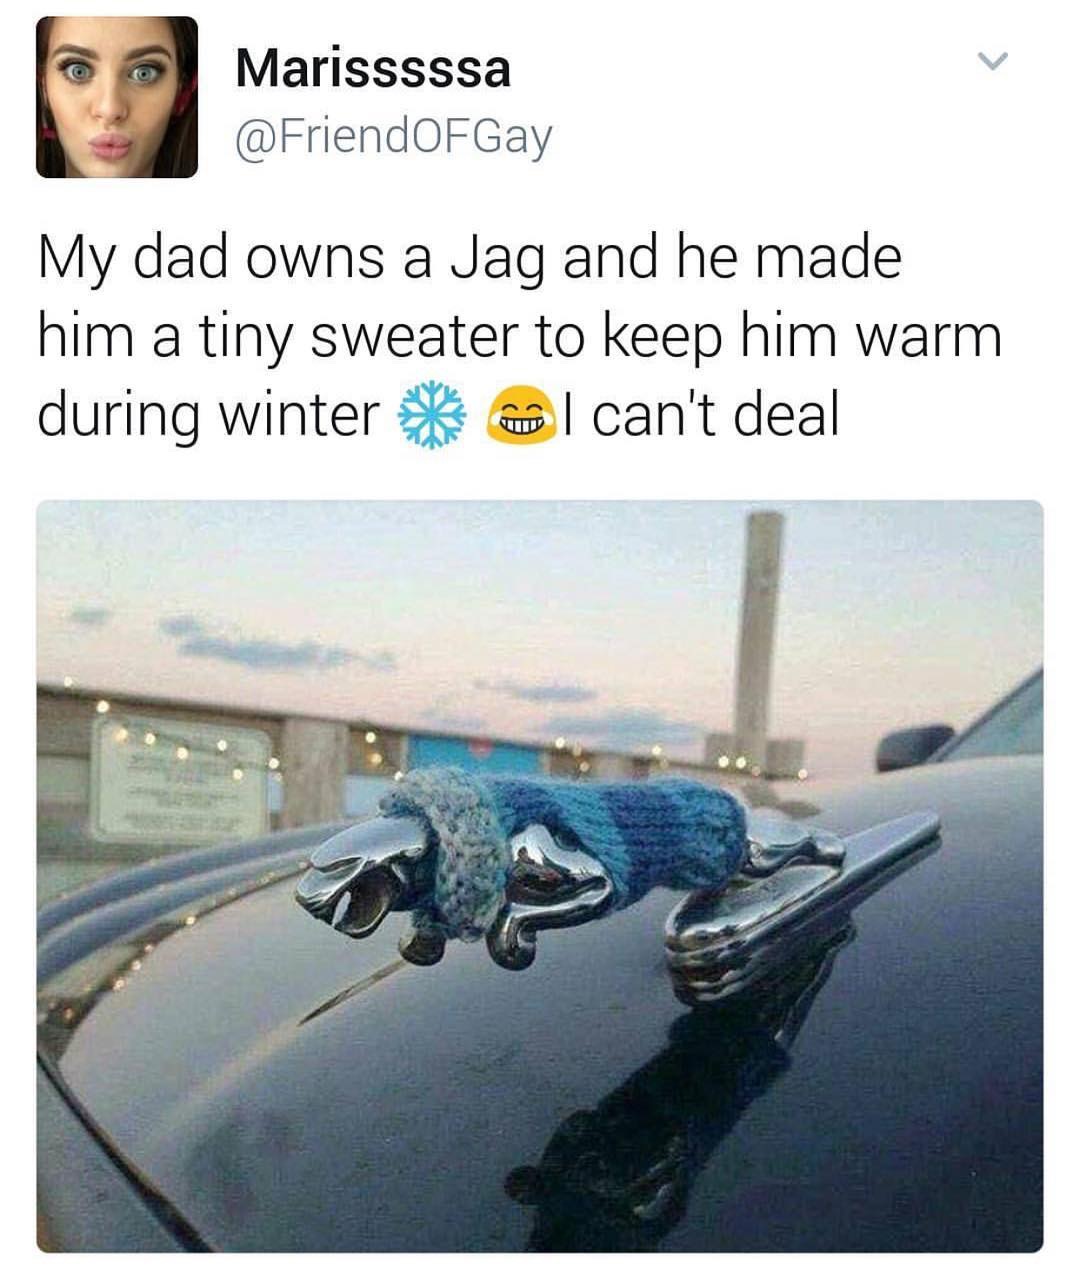 jaguar car meme - Marisssssa My dad owns a Jag and he made him a tiny sweater to keep him warm during winter al can't deal